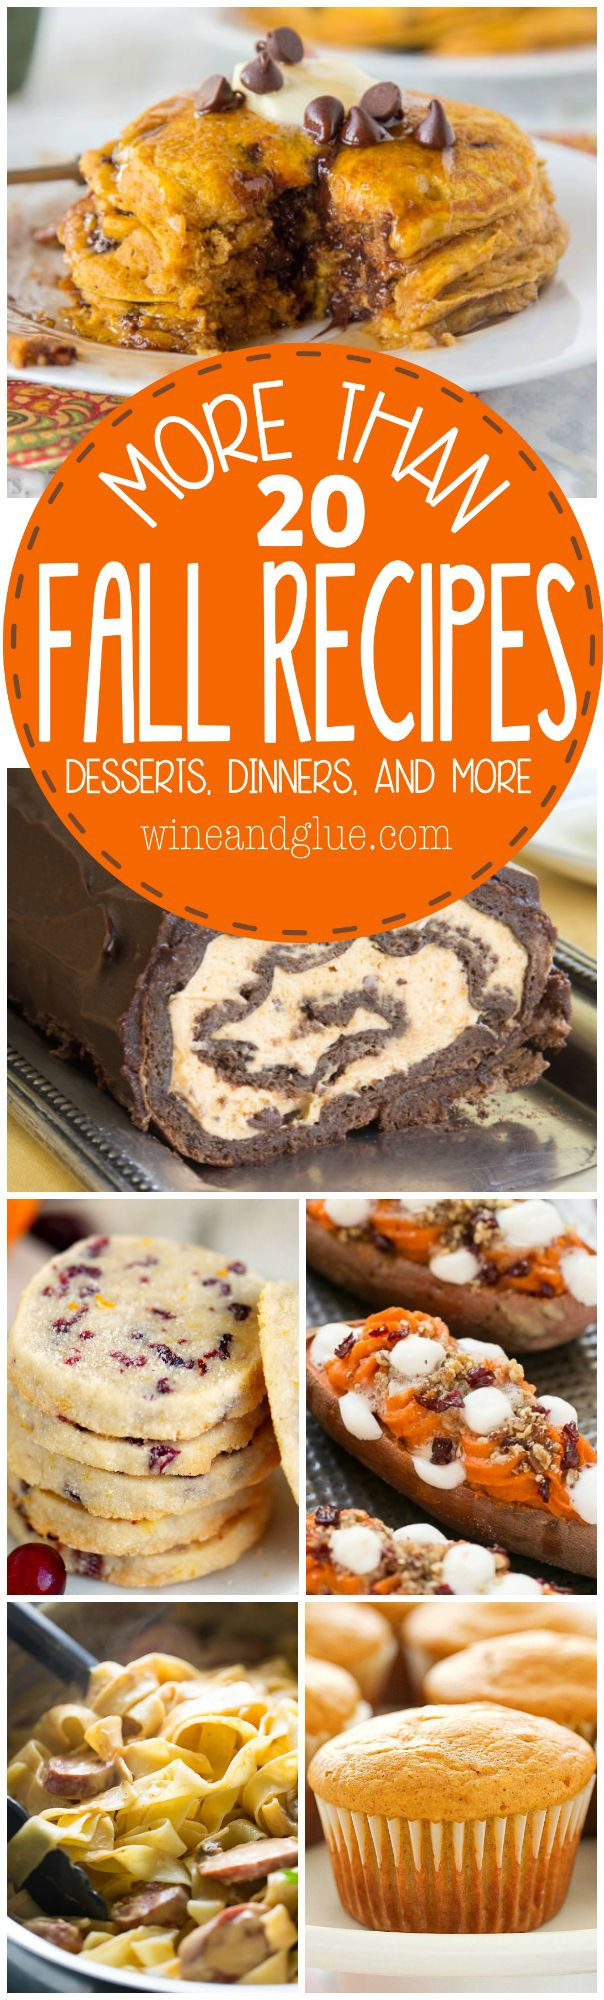 Fall Flavors For Desserts
 More than 20 Fall Recipes full of pumpkin fall flavors